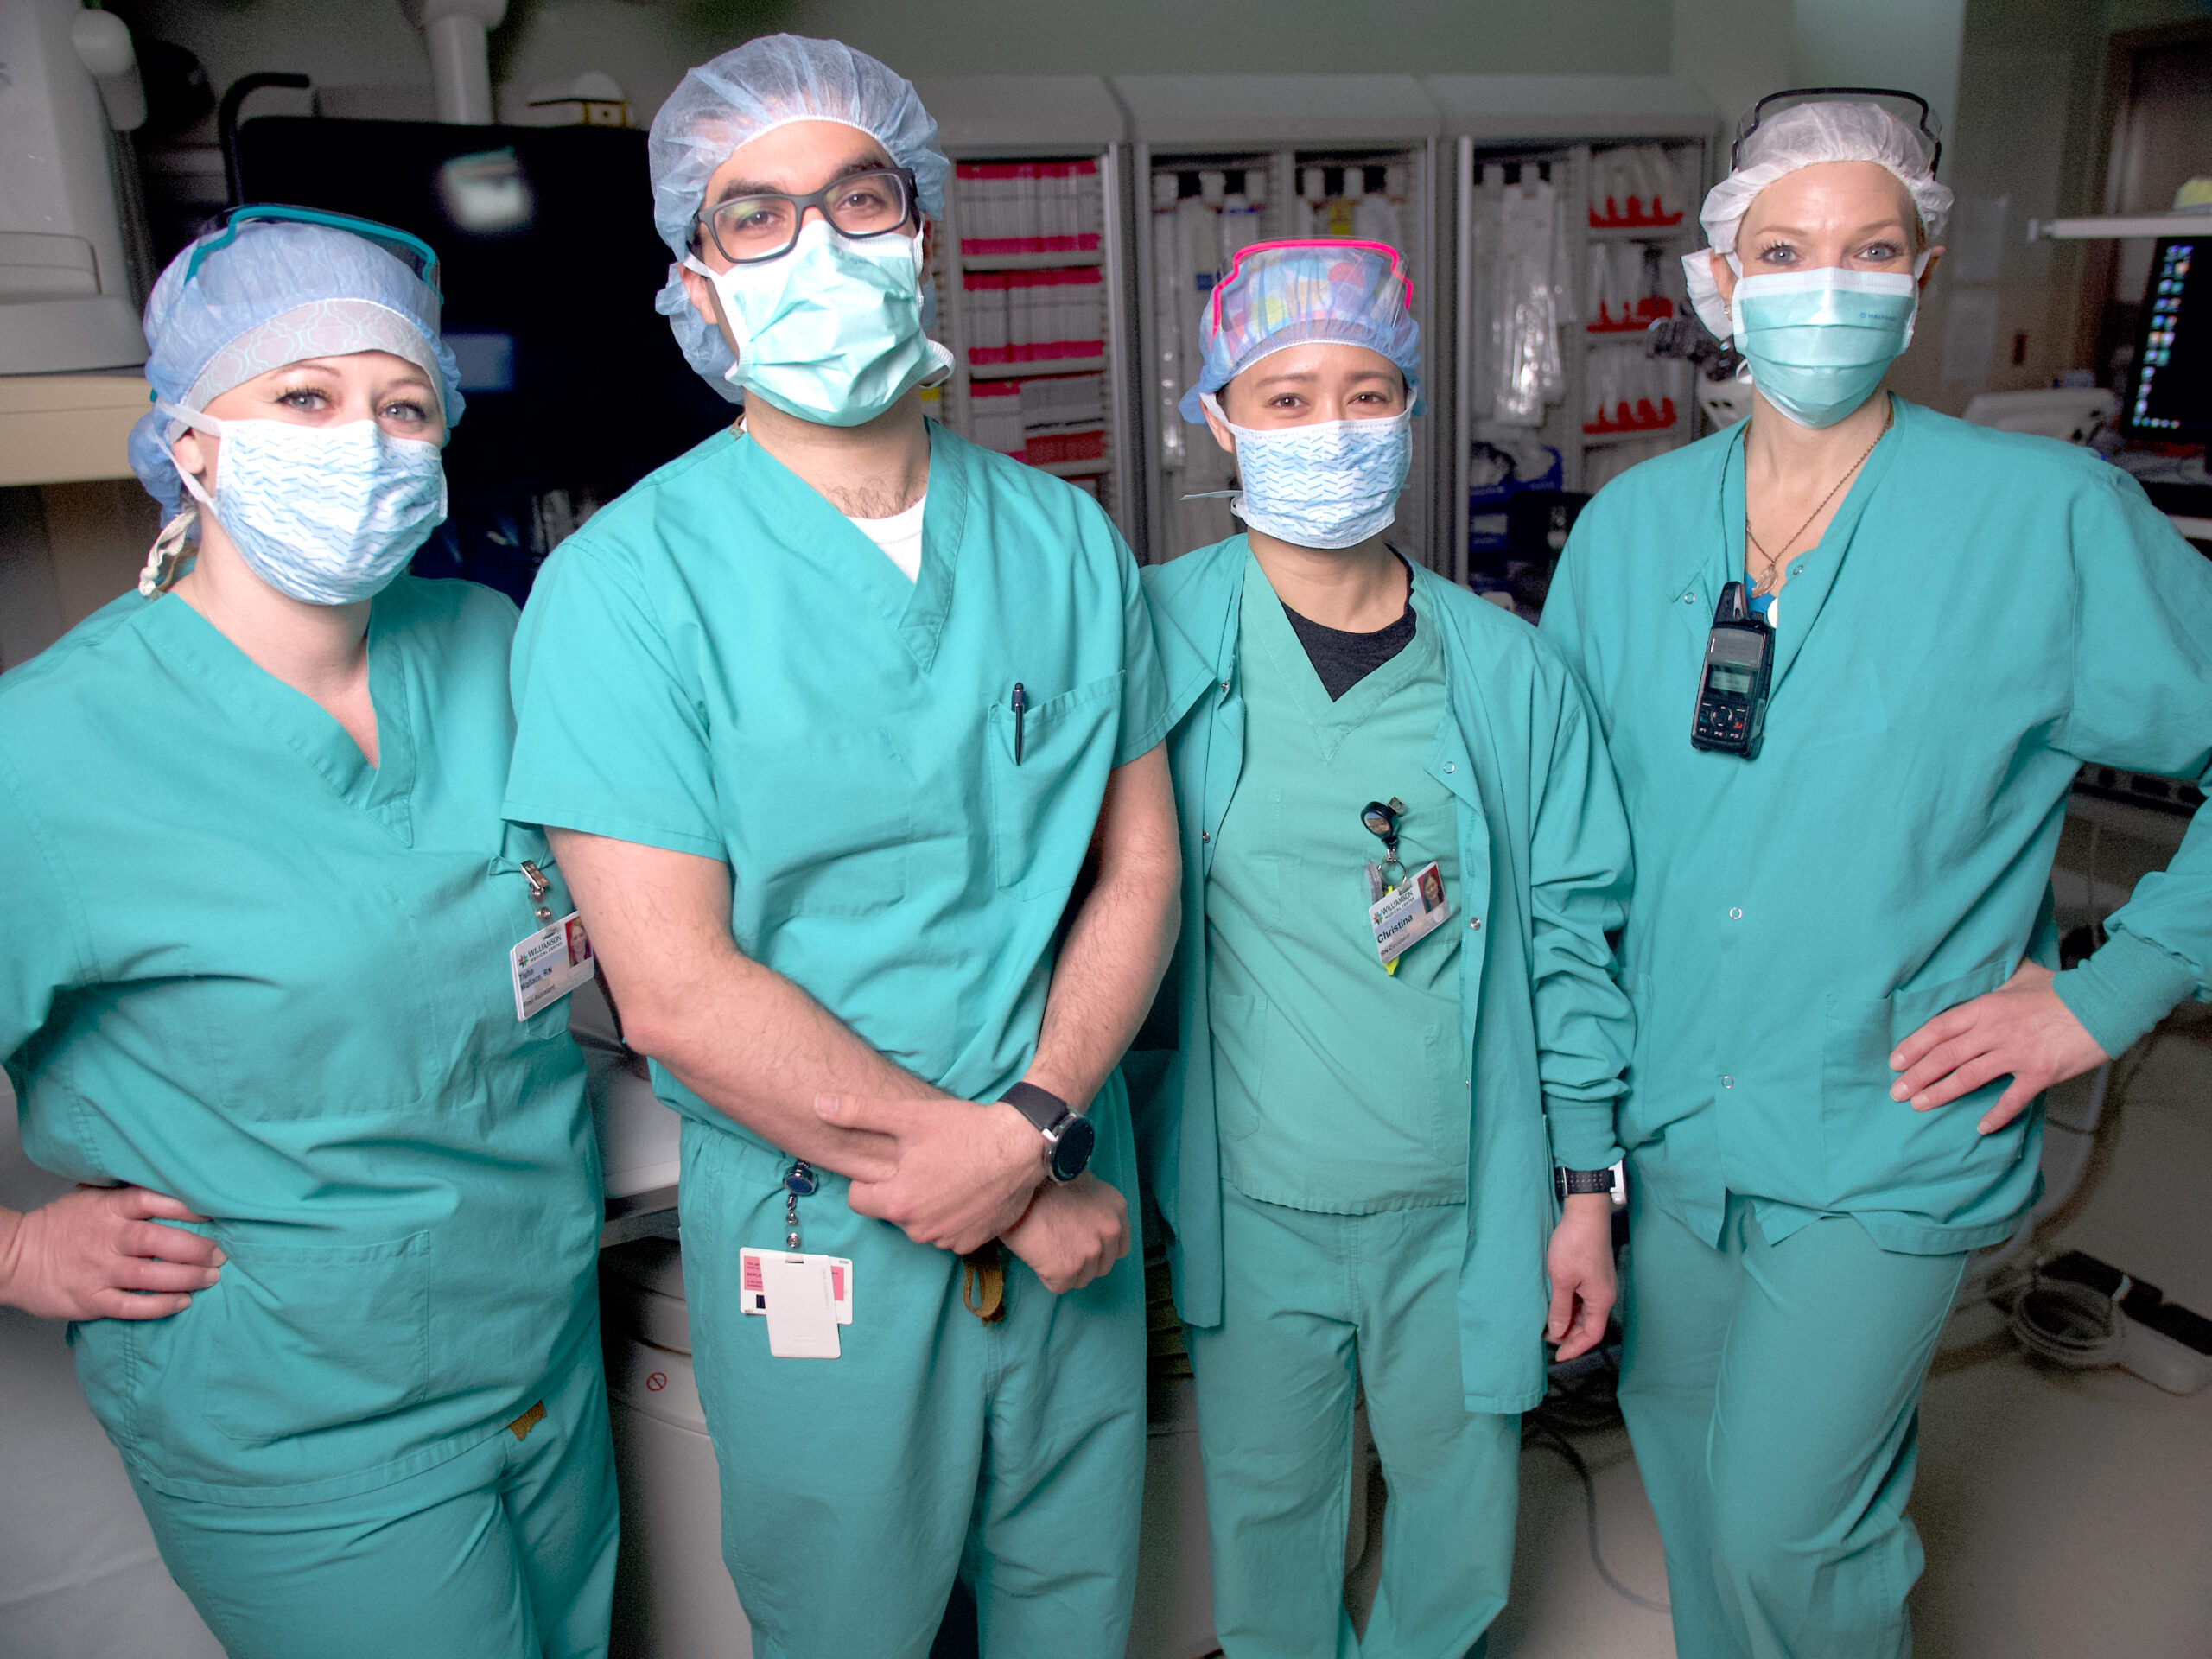 Surgeons in operating room